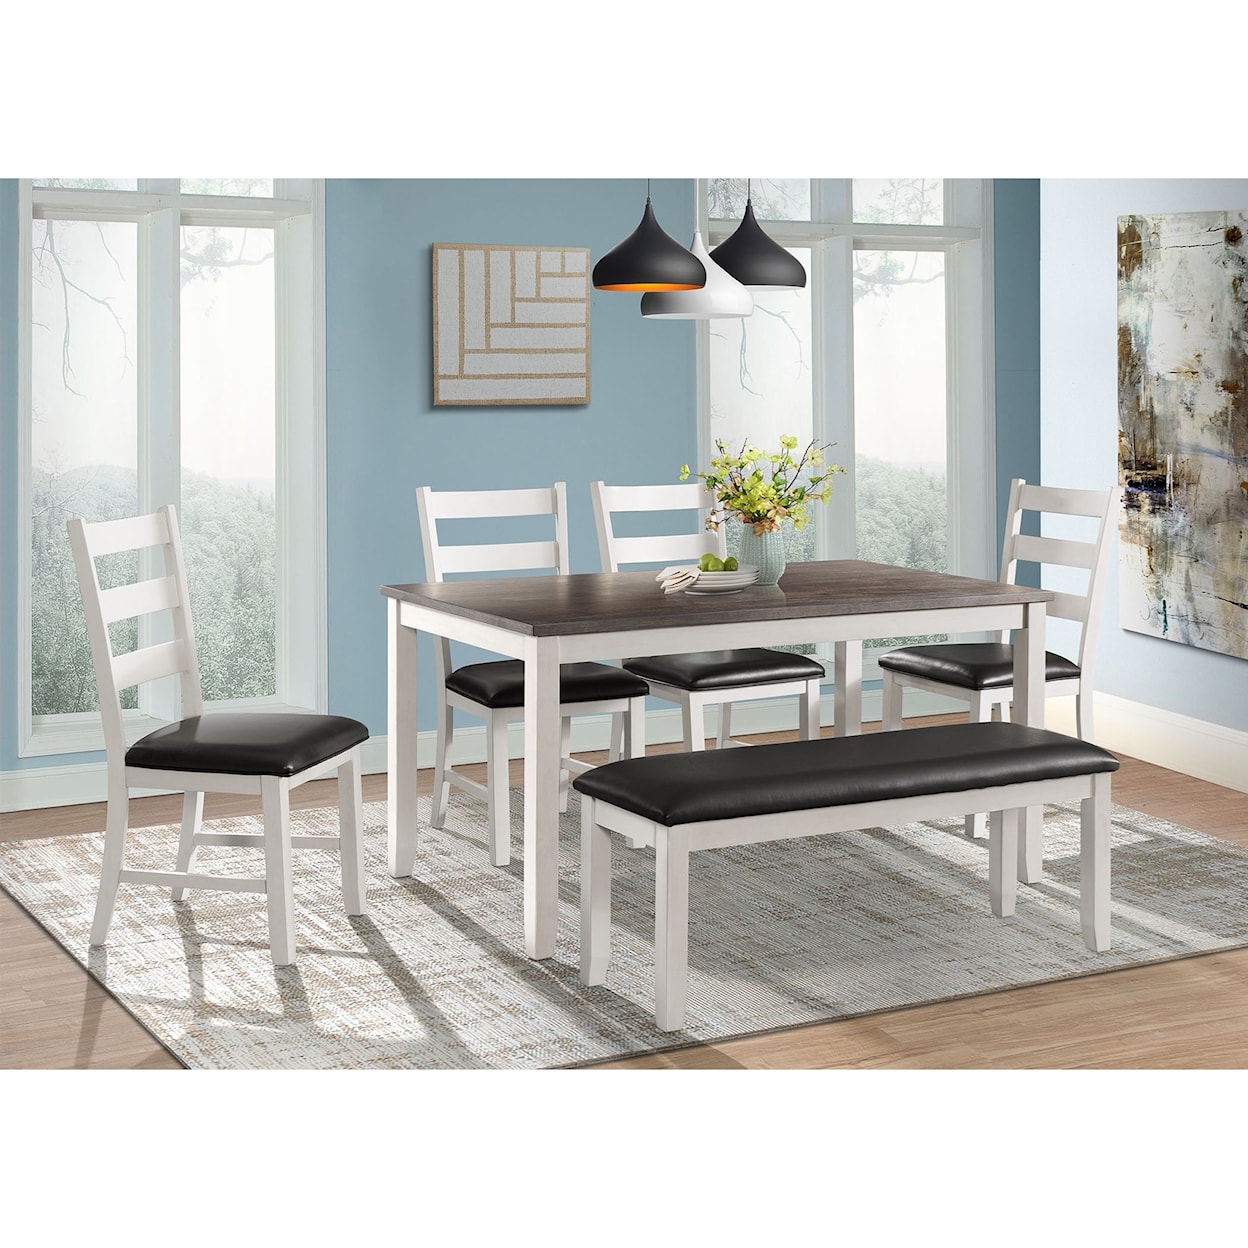 Elements International Martin Dining Table Set with Bench